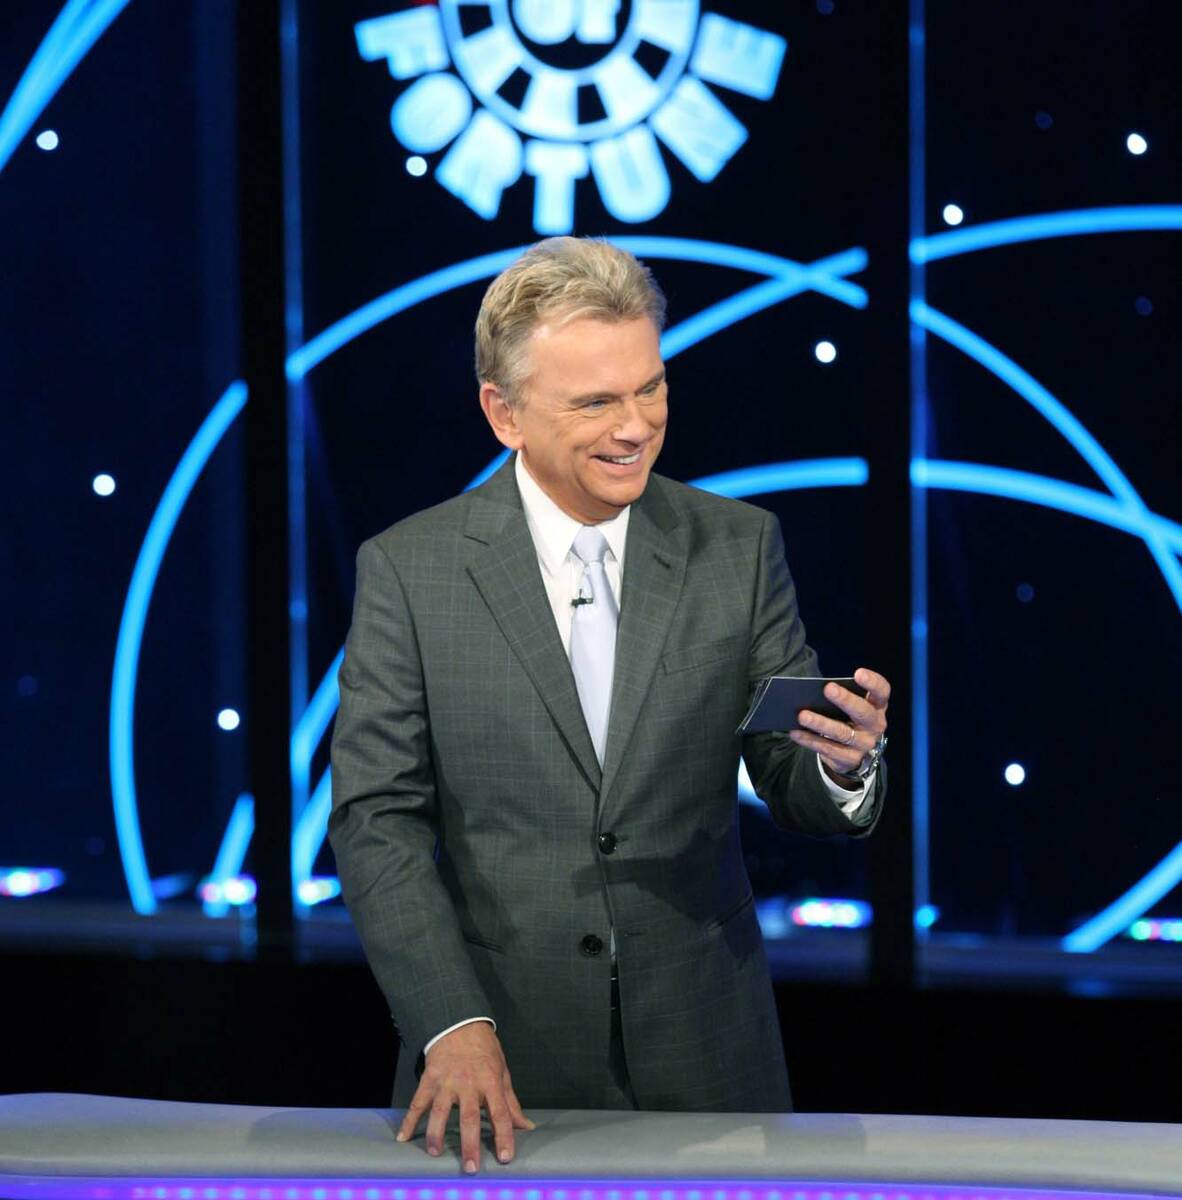 Pat Sajak on the set of "Wheel of Fortune." (courtesy)